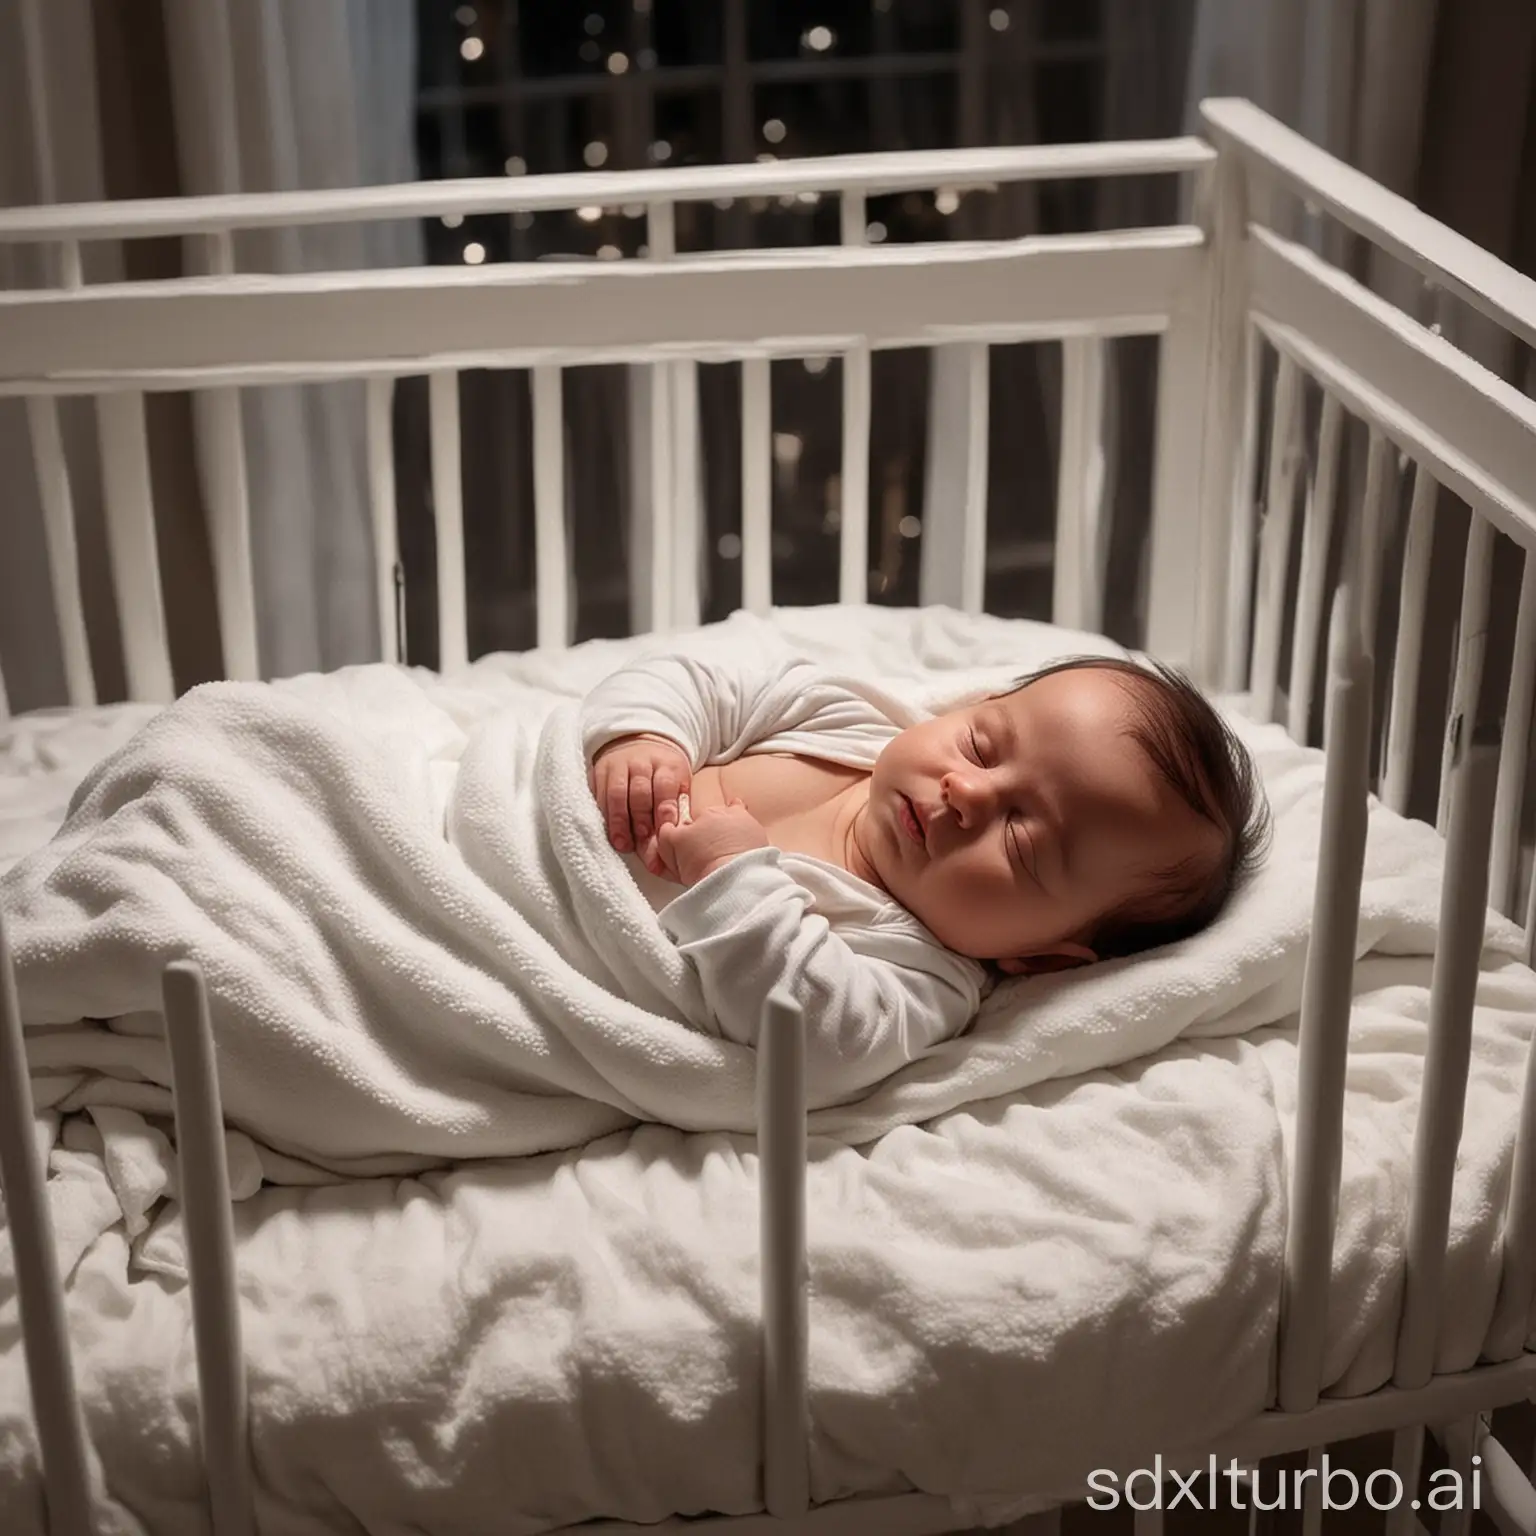 A baby sleeping peacefully in a crib. The baby is wearing a white onesie and has a soft blanket covering them. The crib is in a dark room with a window in the background.